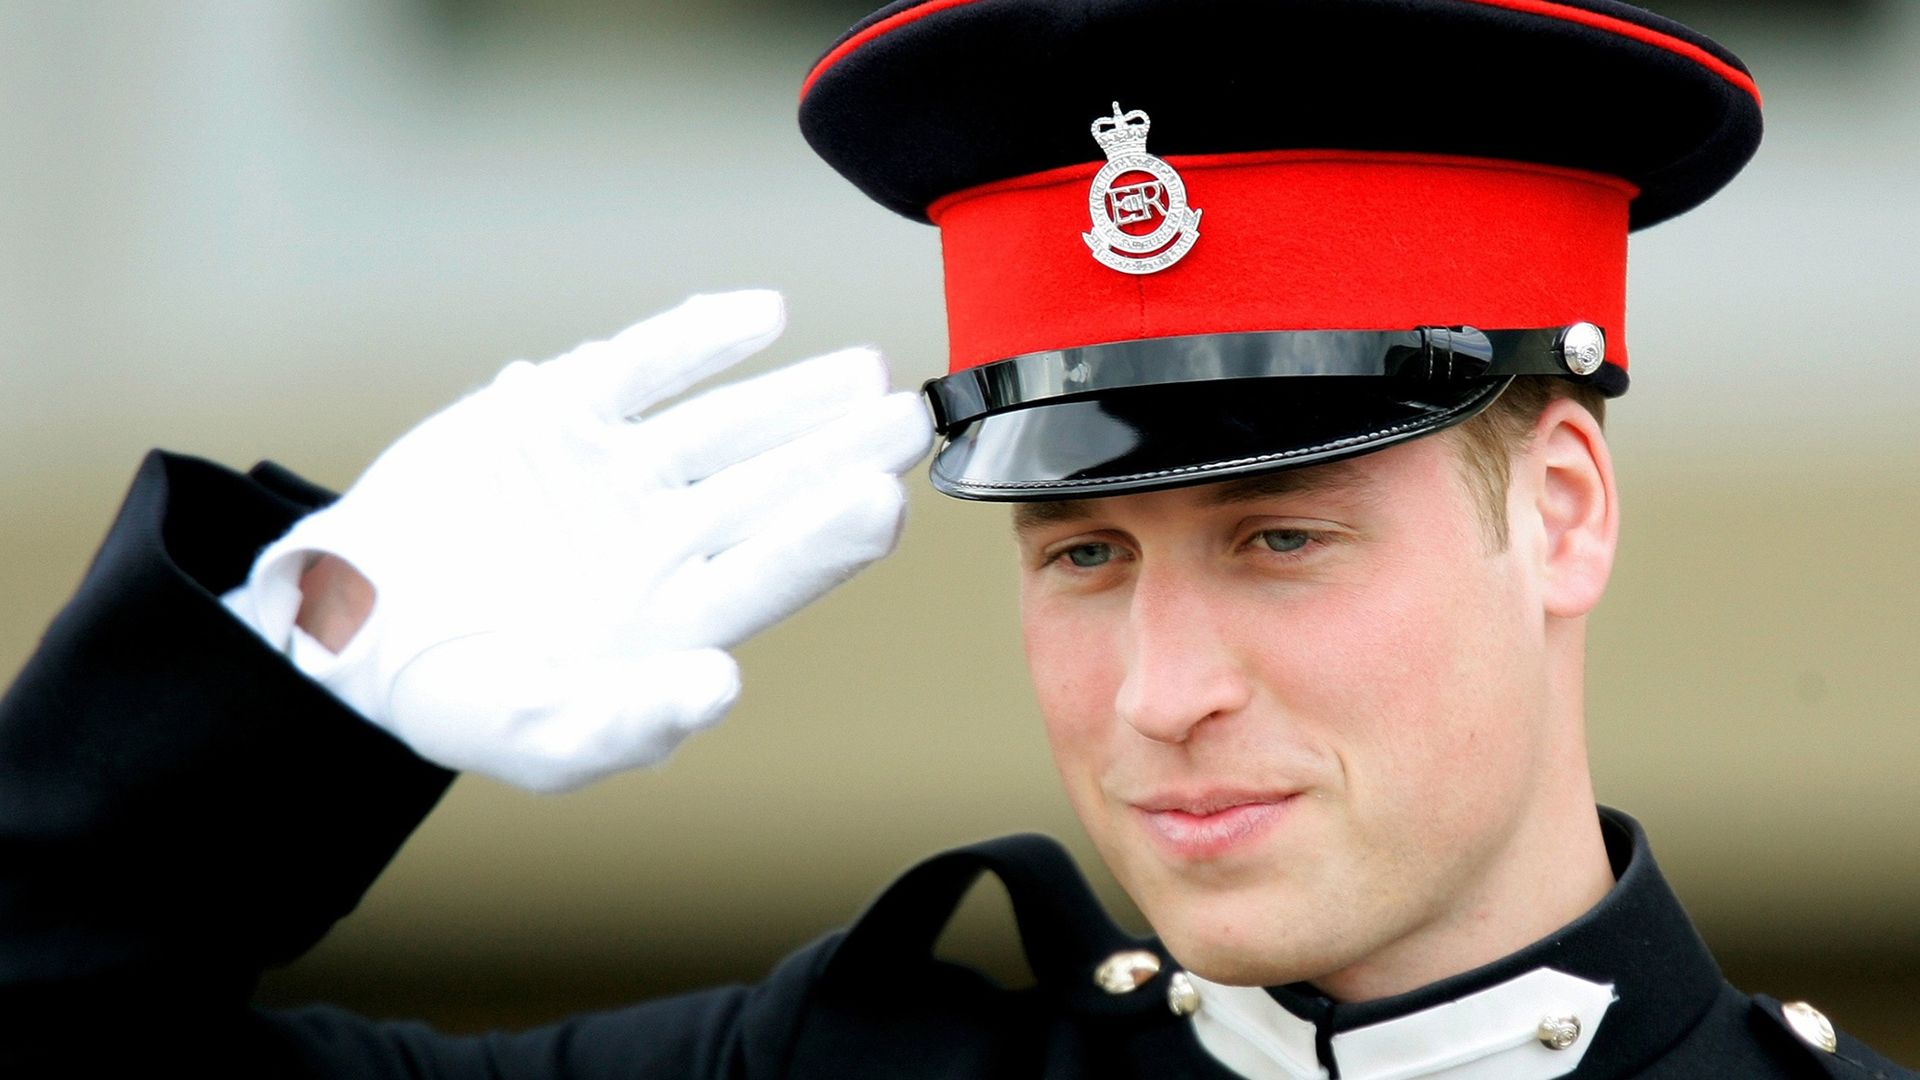 Prince William in the military academy